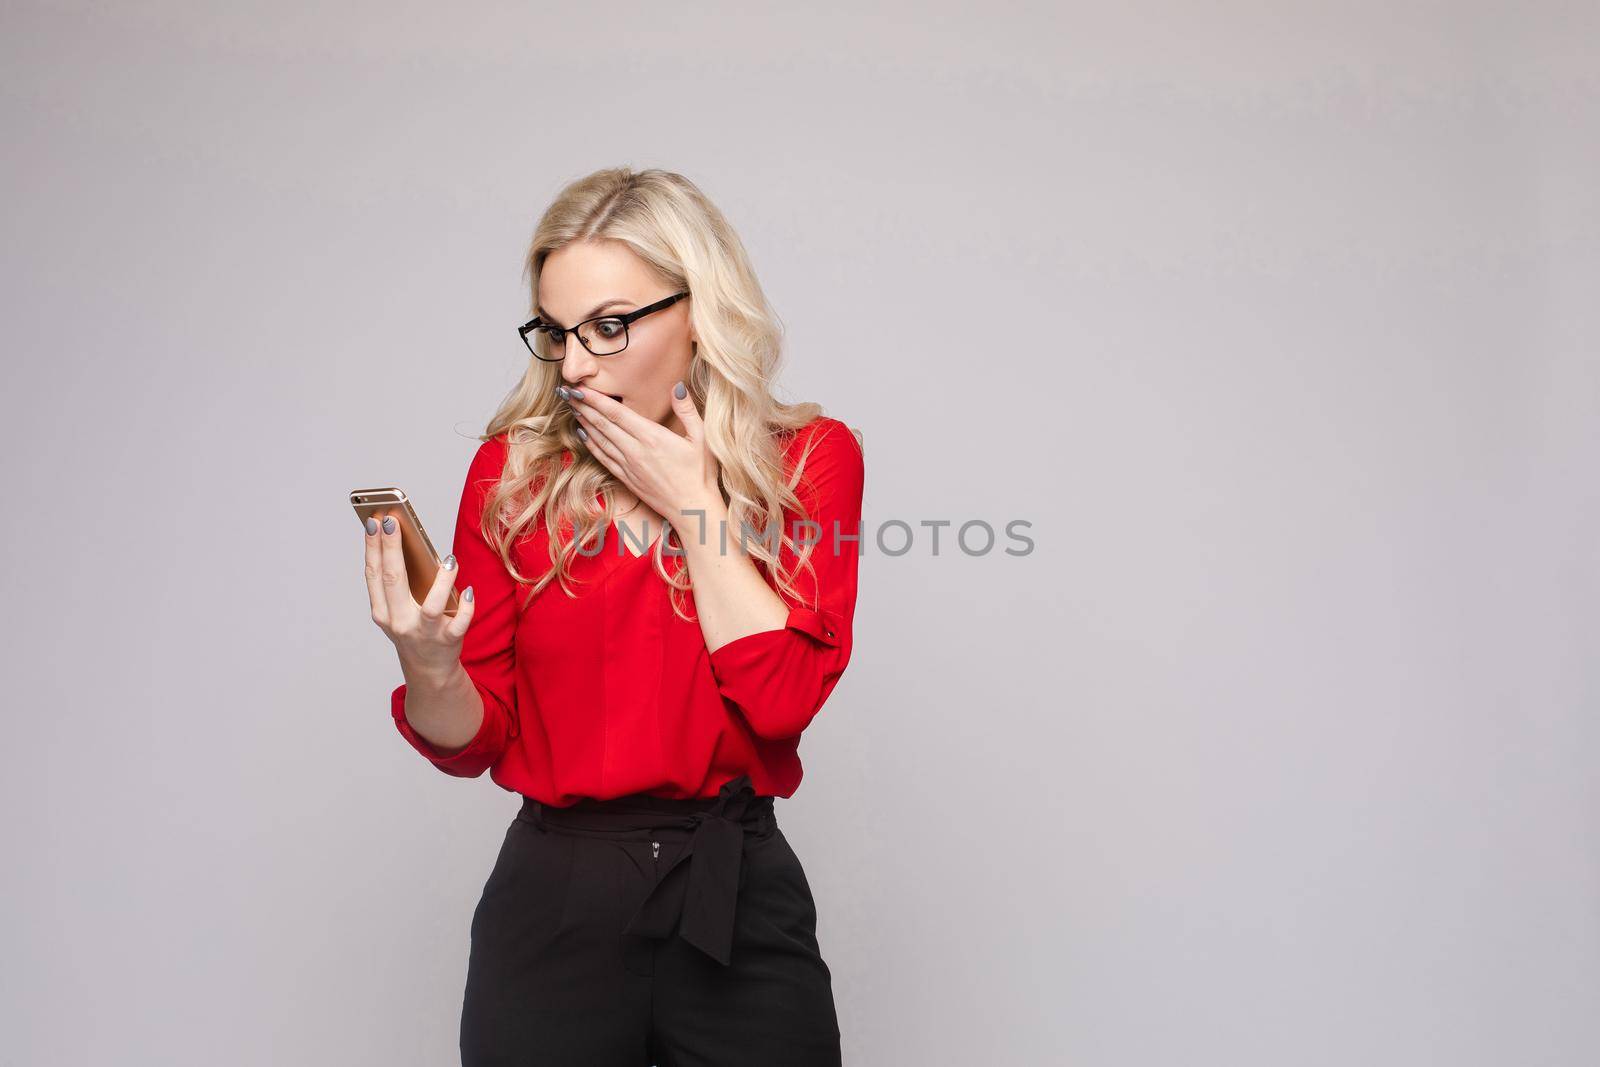 Woman in red blouse and skirt keeping phone and laughing by StudioLucky